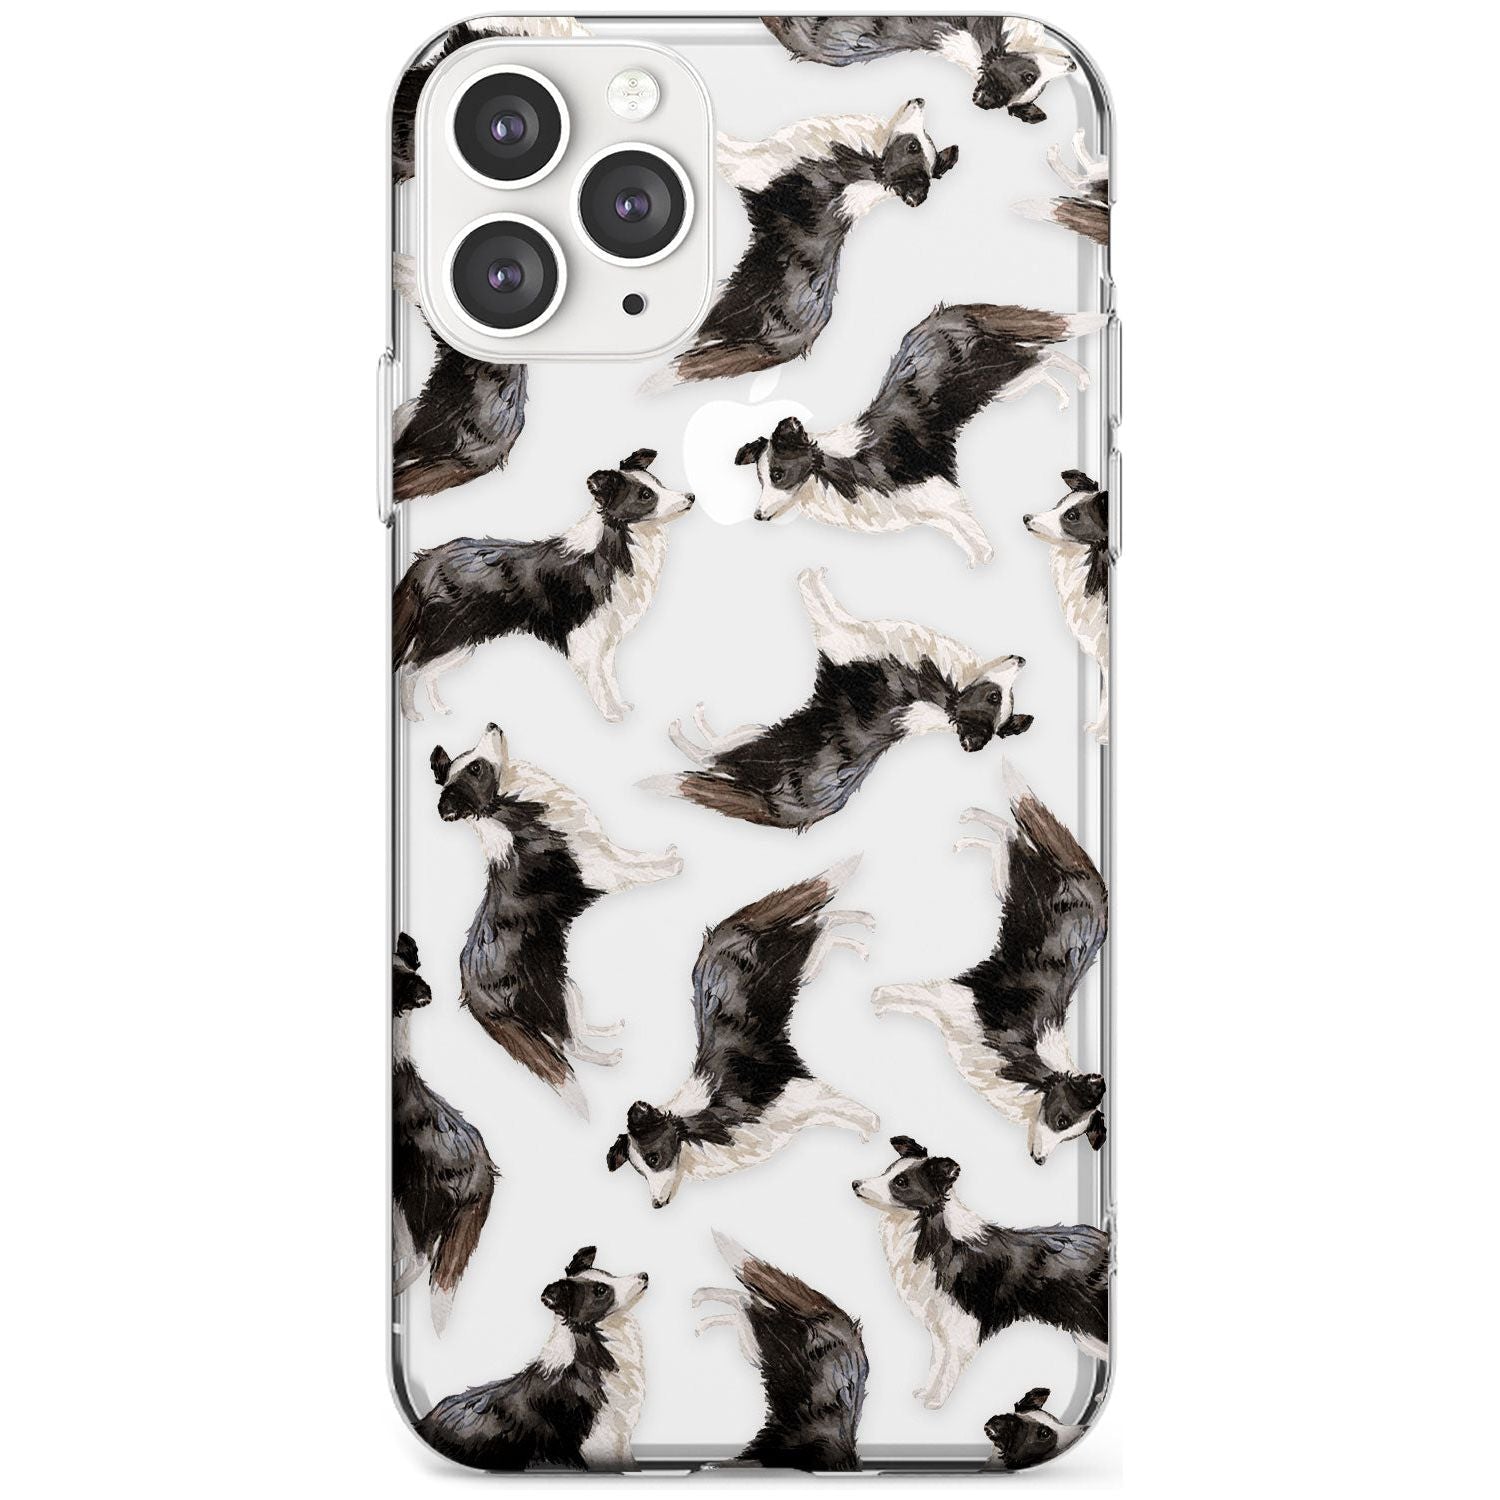 Border Collie Watercolour Dog Pattern Slim TPU Phone Case for iPhone 11 Pro Max